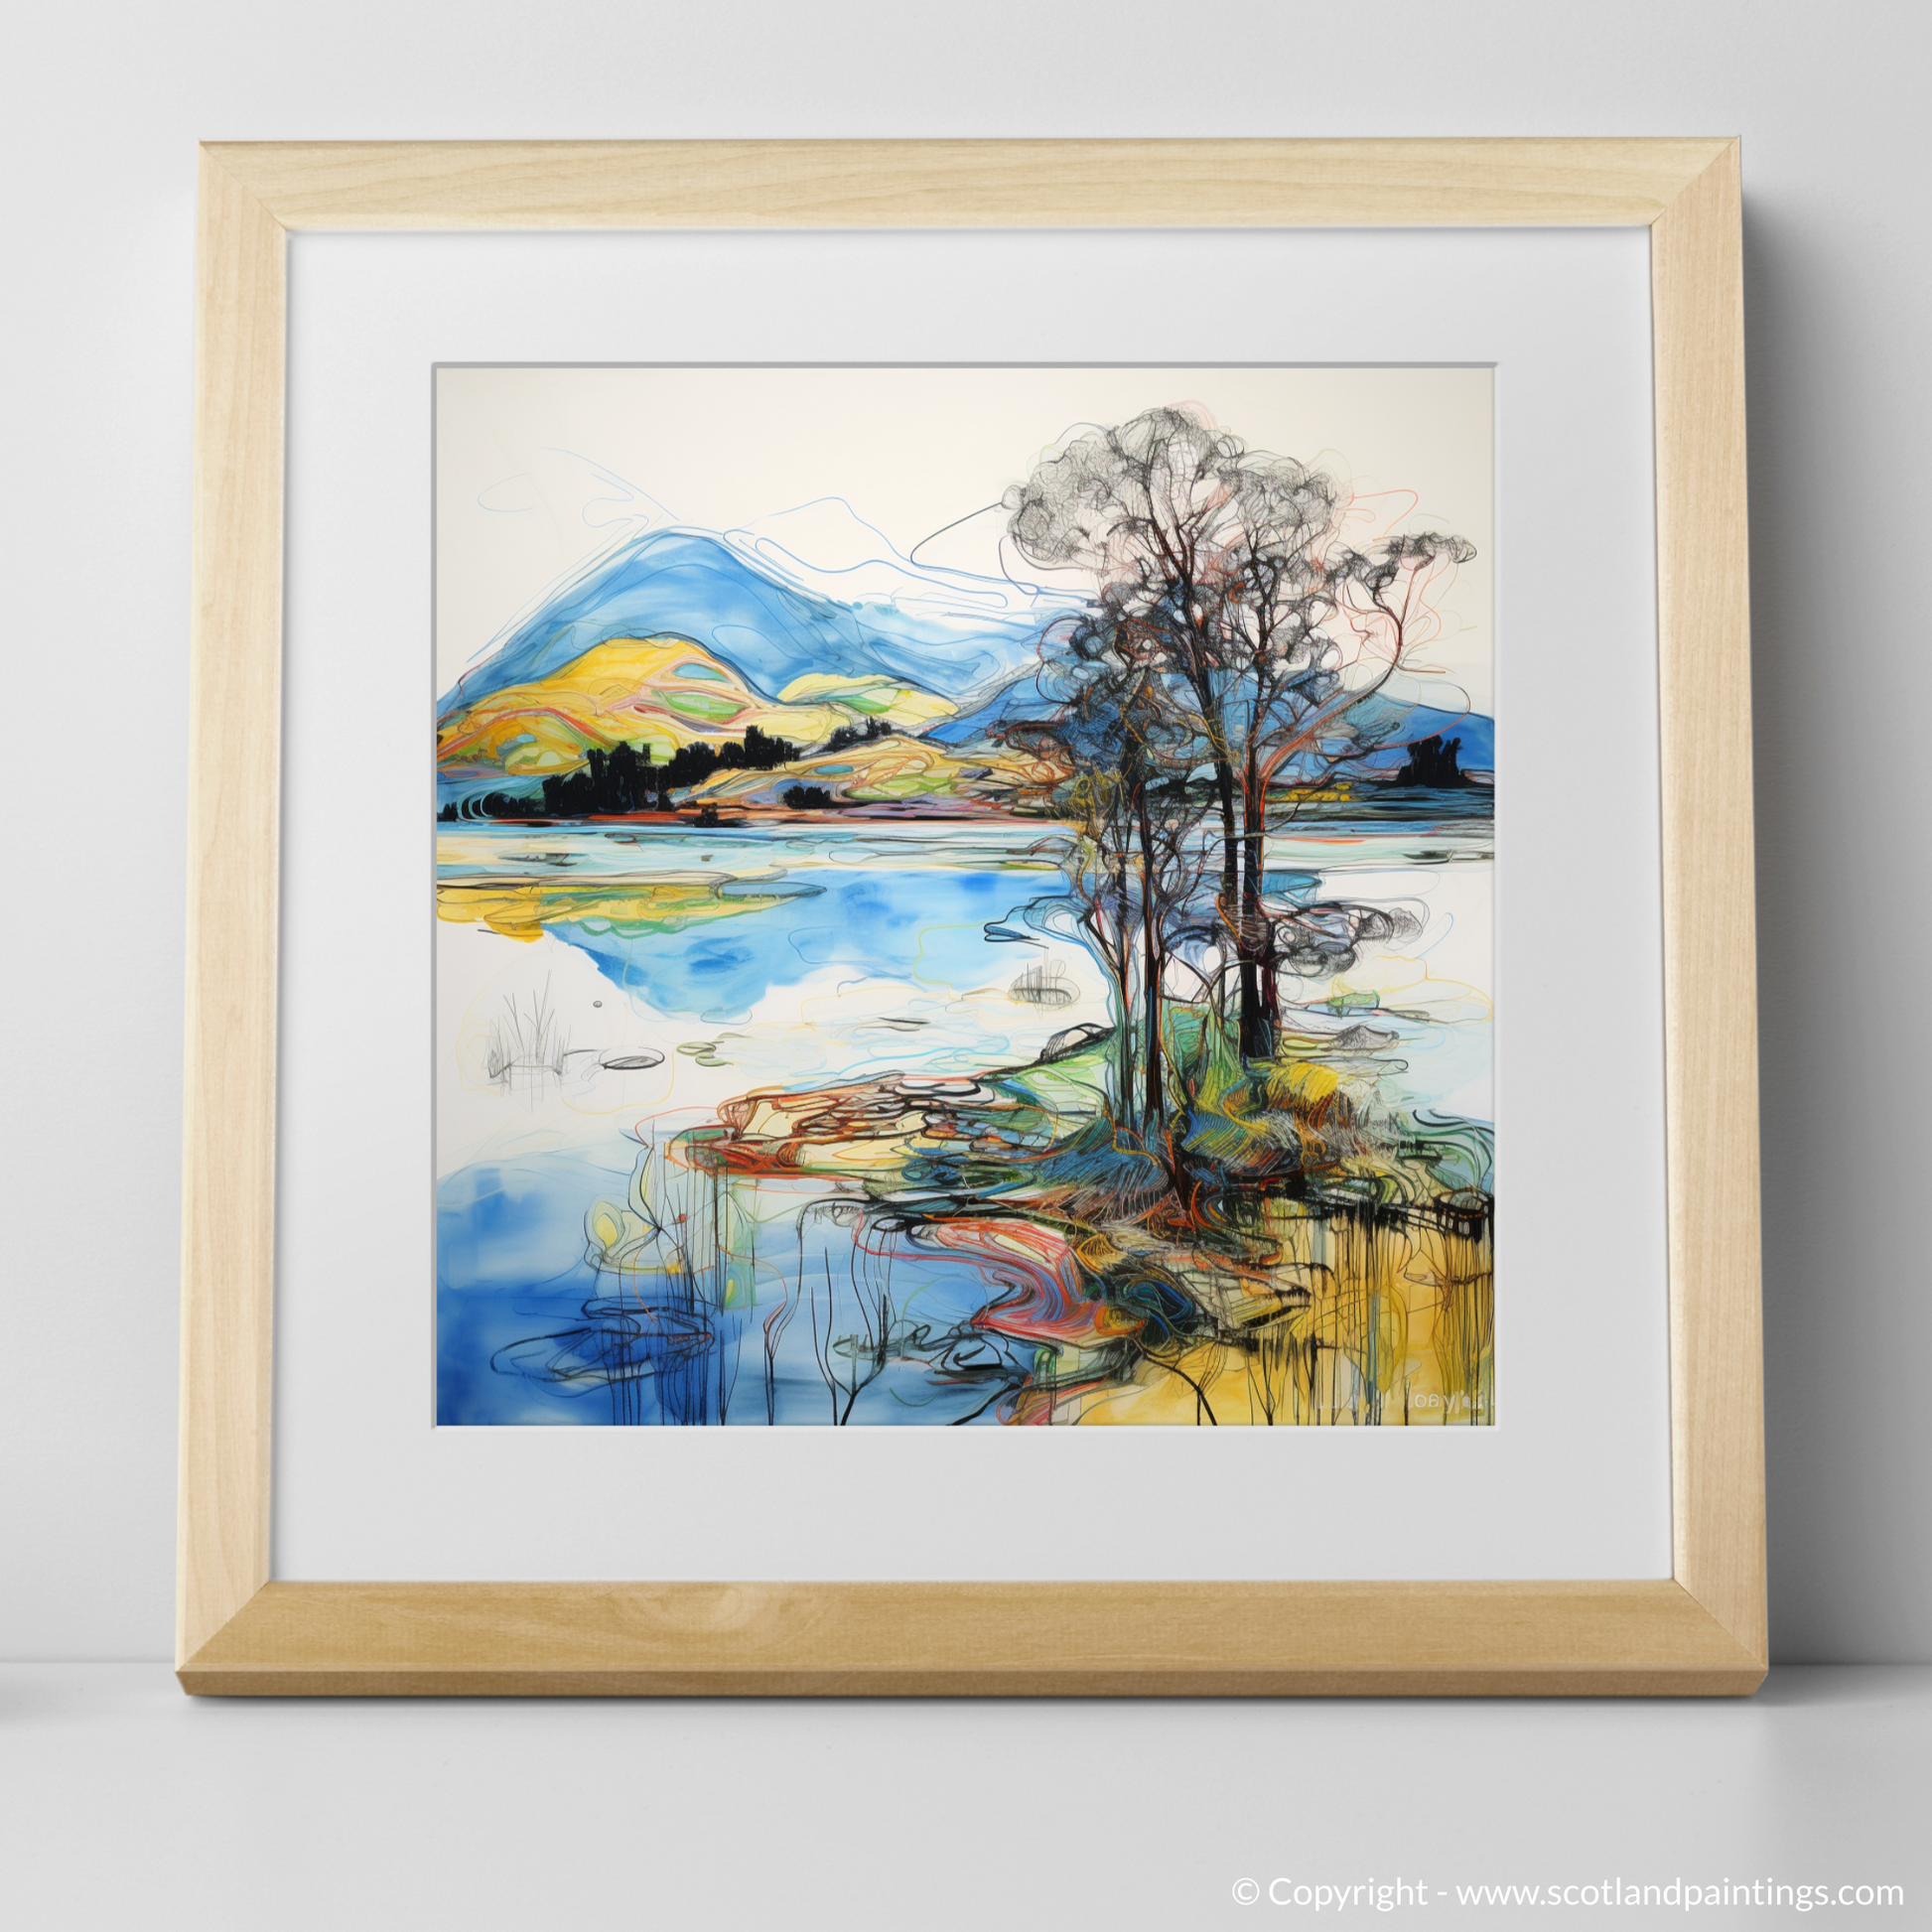 Art Print of Loch Awe with a natural frame